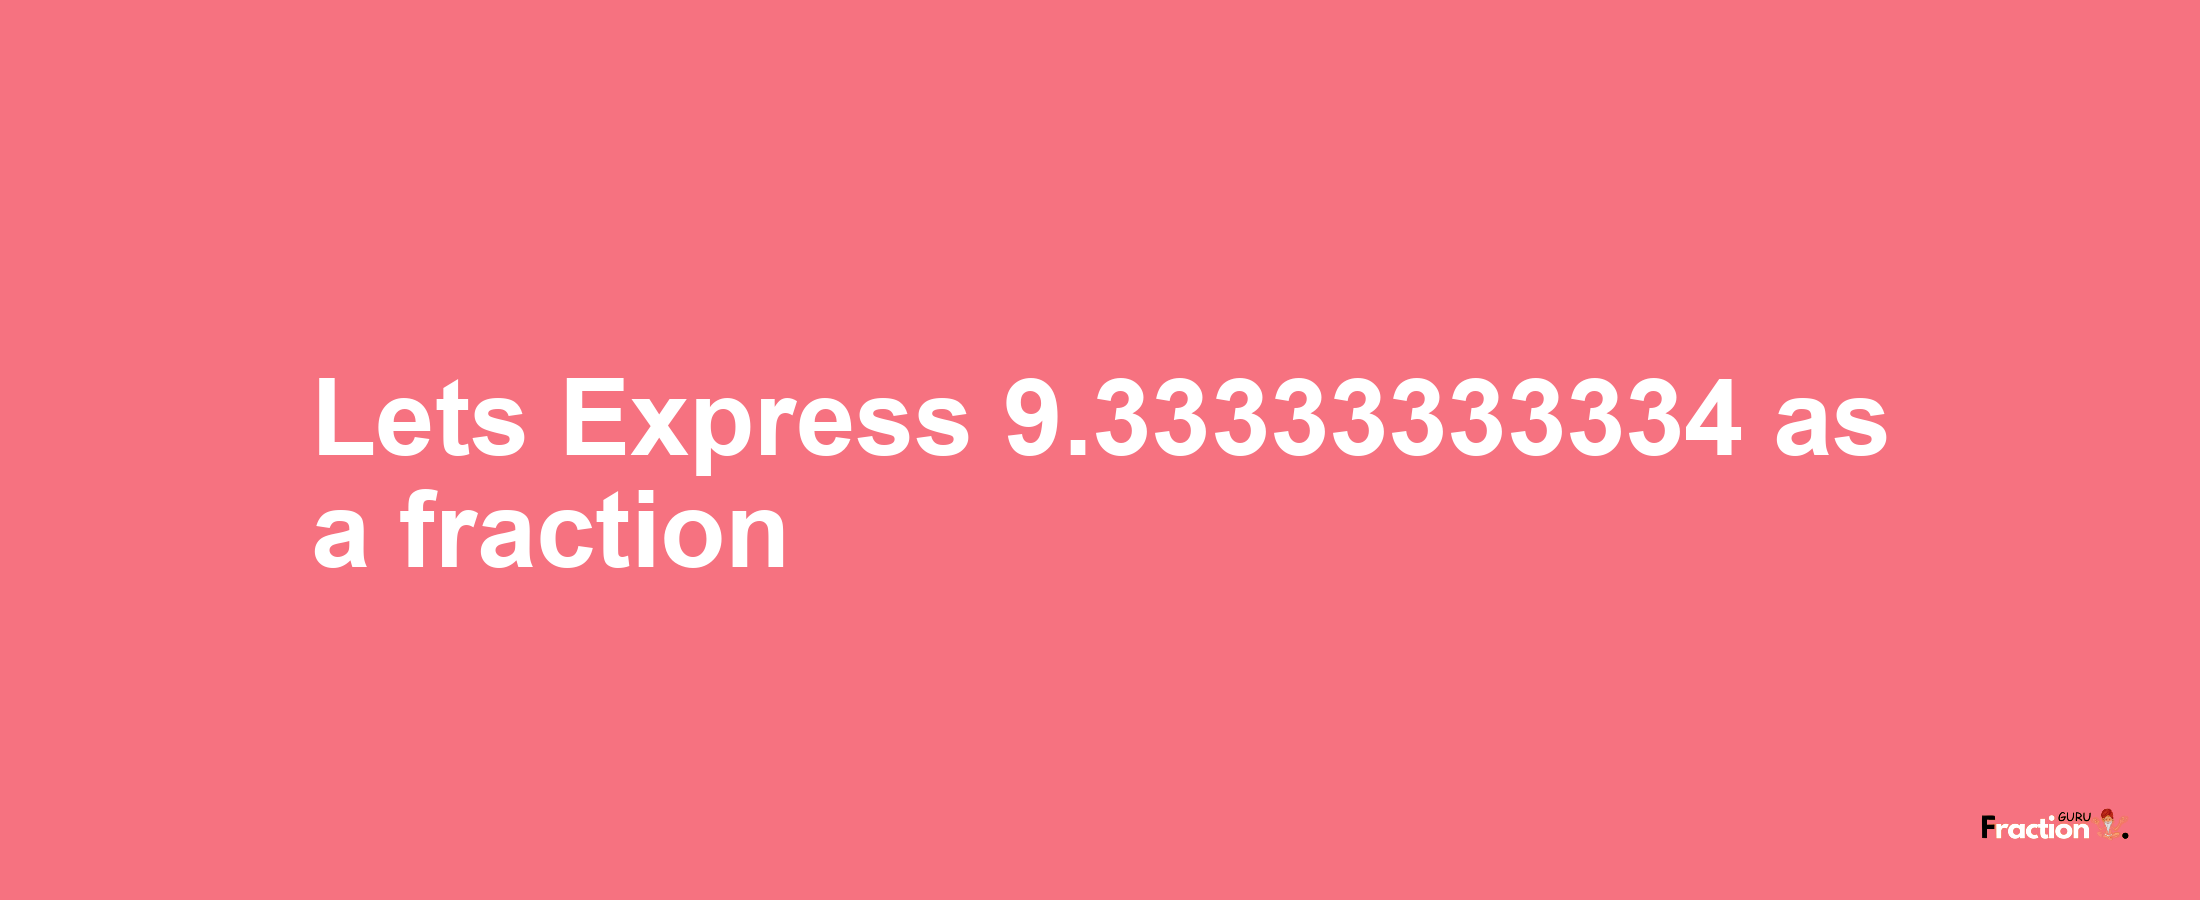 Lets Express 9.33333333334 as afraction